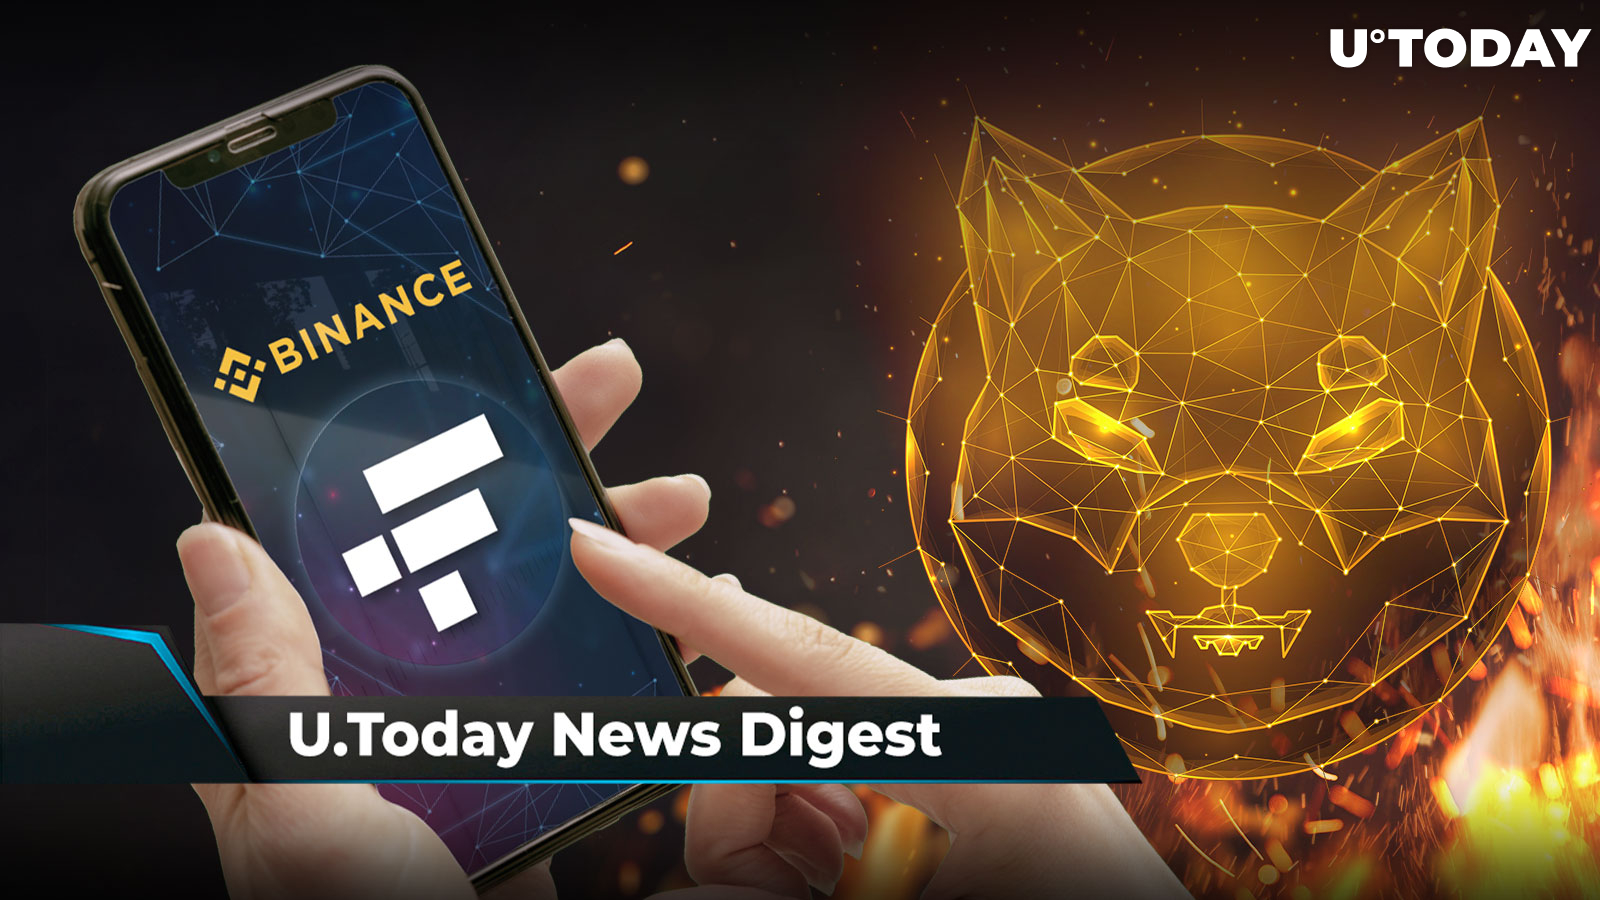 Binance Dumps FTX, SHIB Burn Rate up 5,800%, U.S. Lawyer Predicts Date of Ripple Case Resolution: Crypto News Digest by U.Today